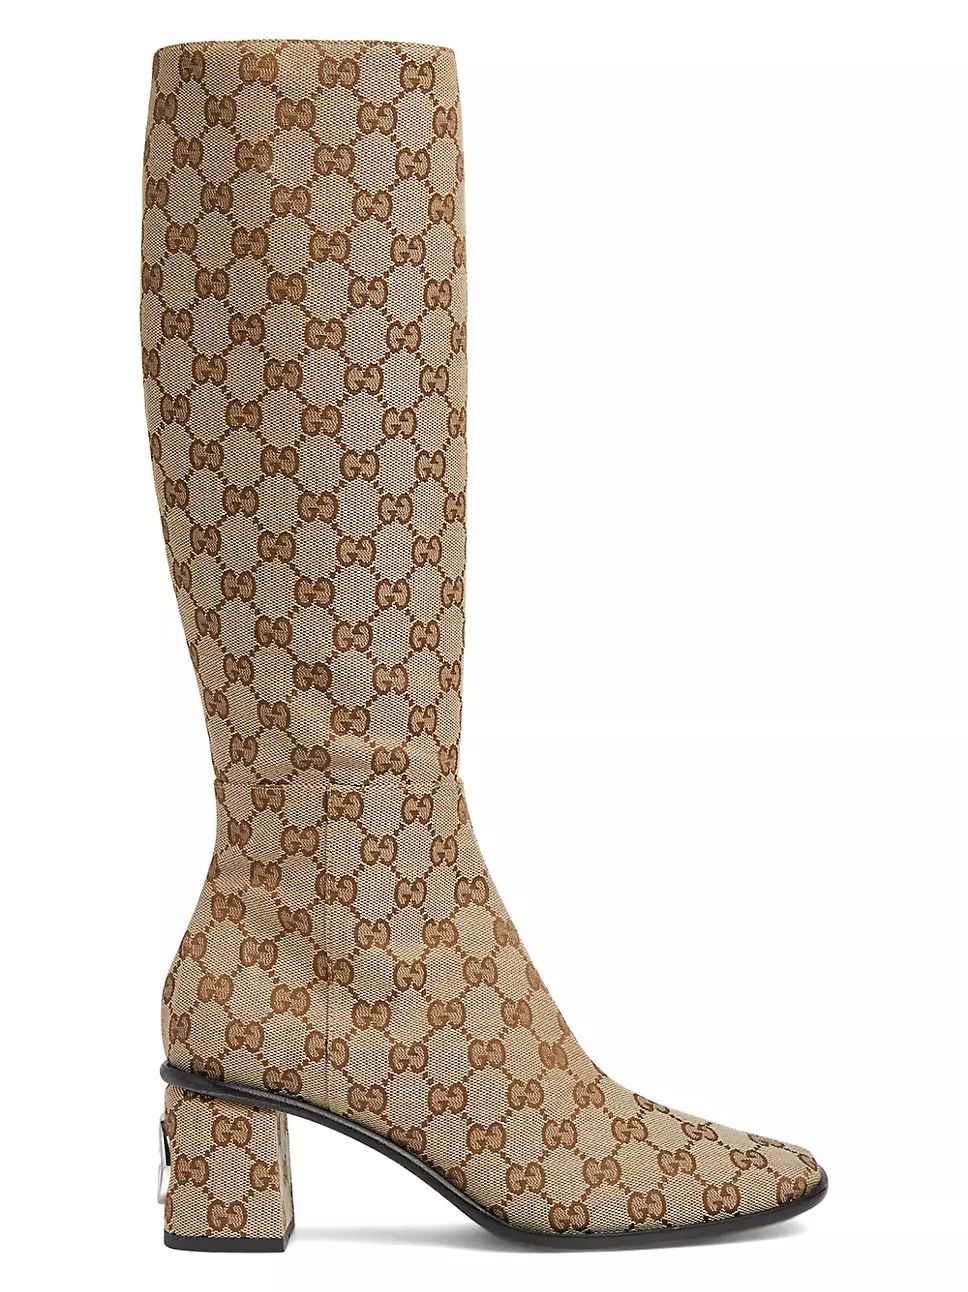 Onyx 50MM GG Canvas Knee-High Boots | Saks Fifth Avenue